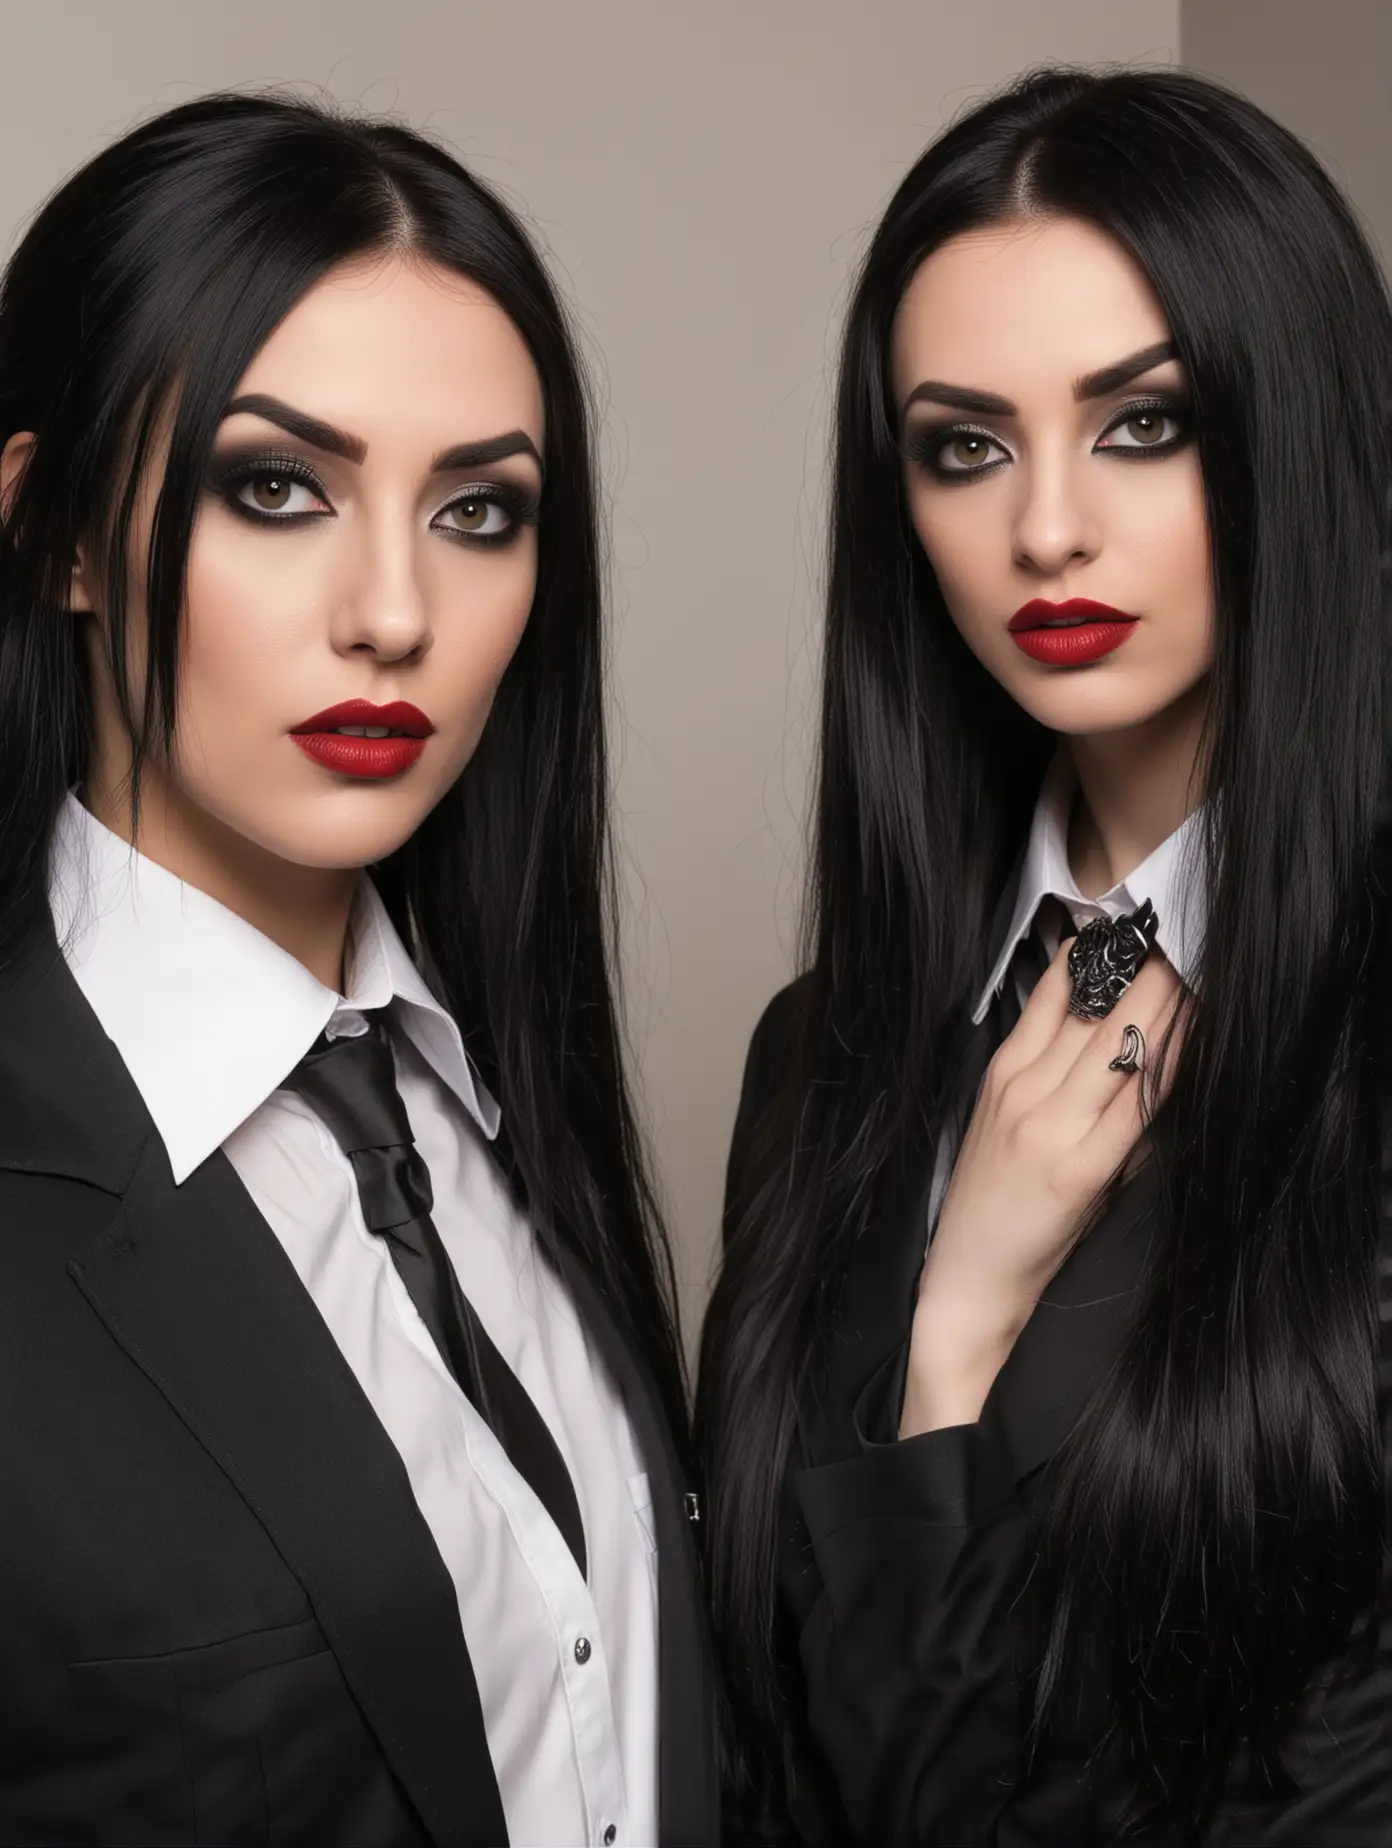 Black Metal Boss and Gothic Secretary Share Late Night Attraction